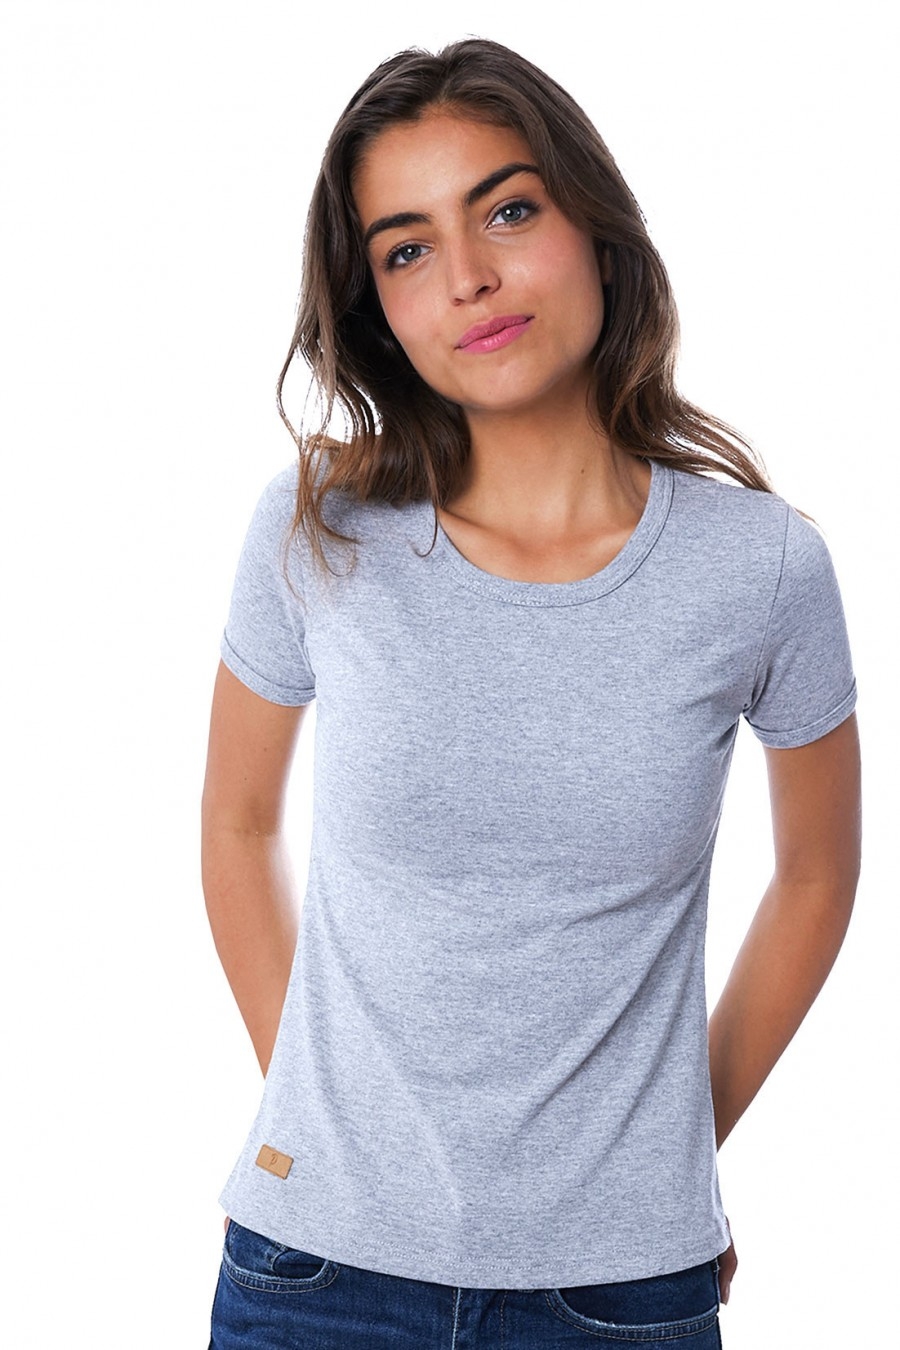 T-SHIRT FEMME COL ROND GRIS CLAIR CHINE UNI - Made in France & Coton Bio